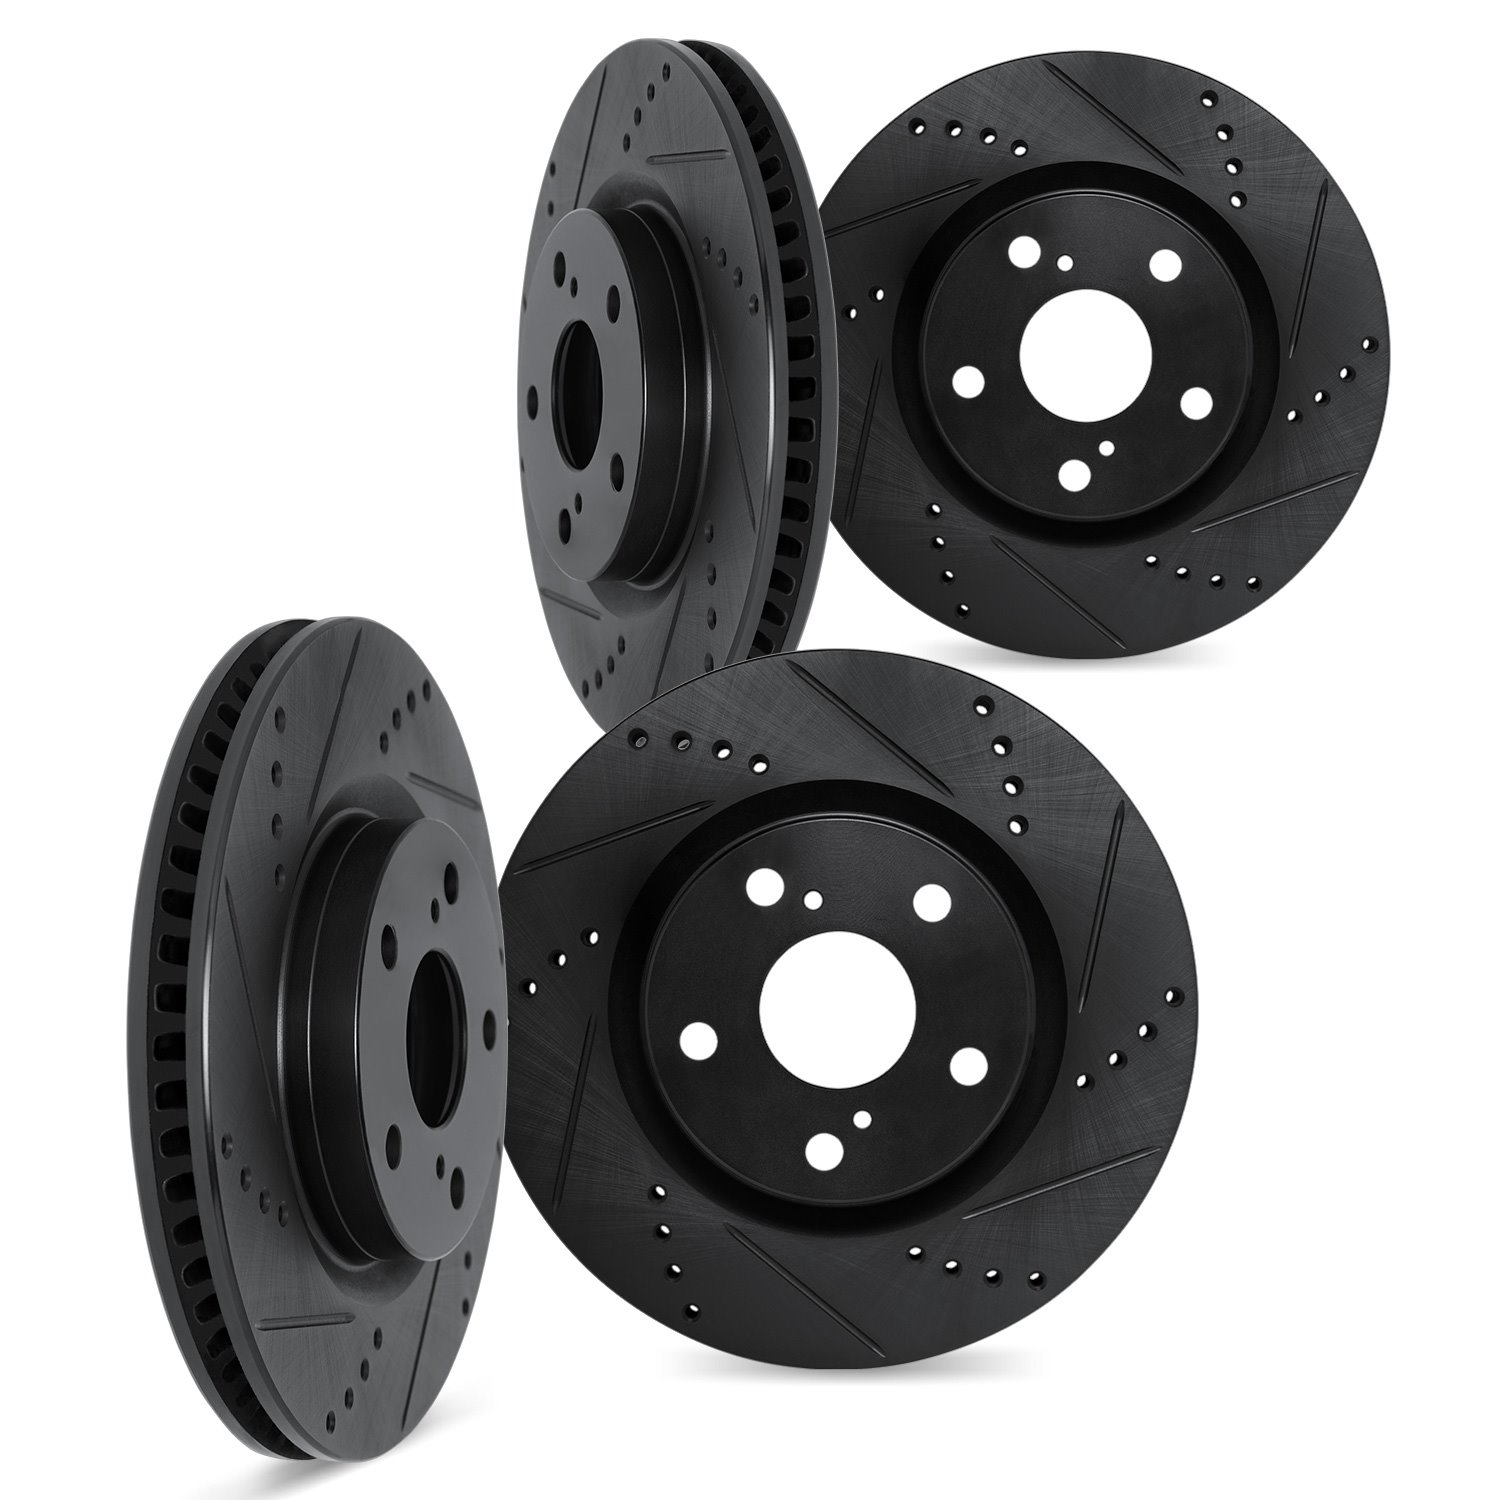 8004-39043 Drilled/Slotted Brake Rotors [Black], Fits Select Mopar, Position: Front and Rear